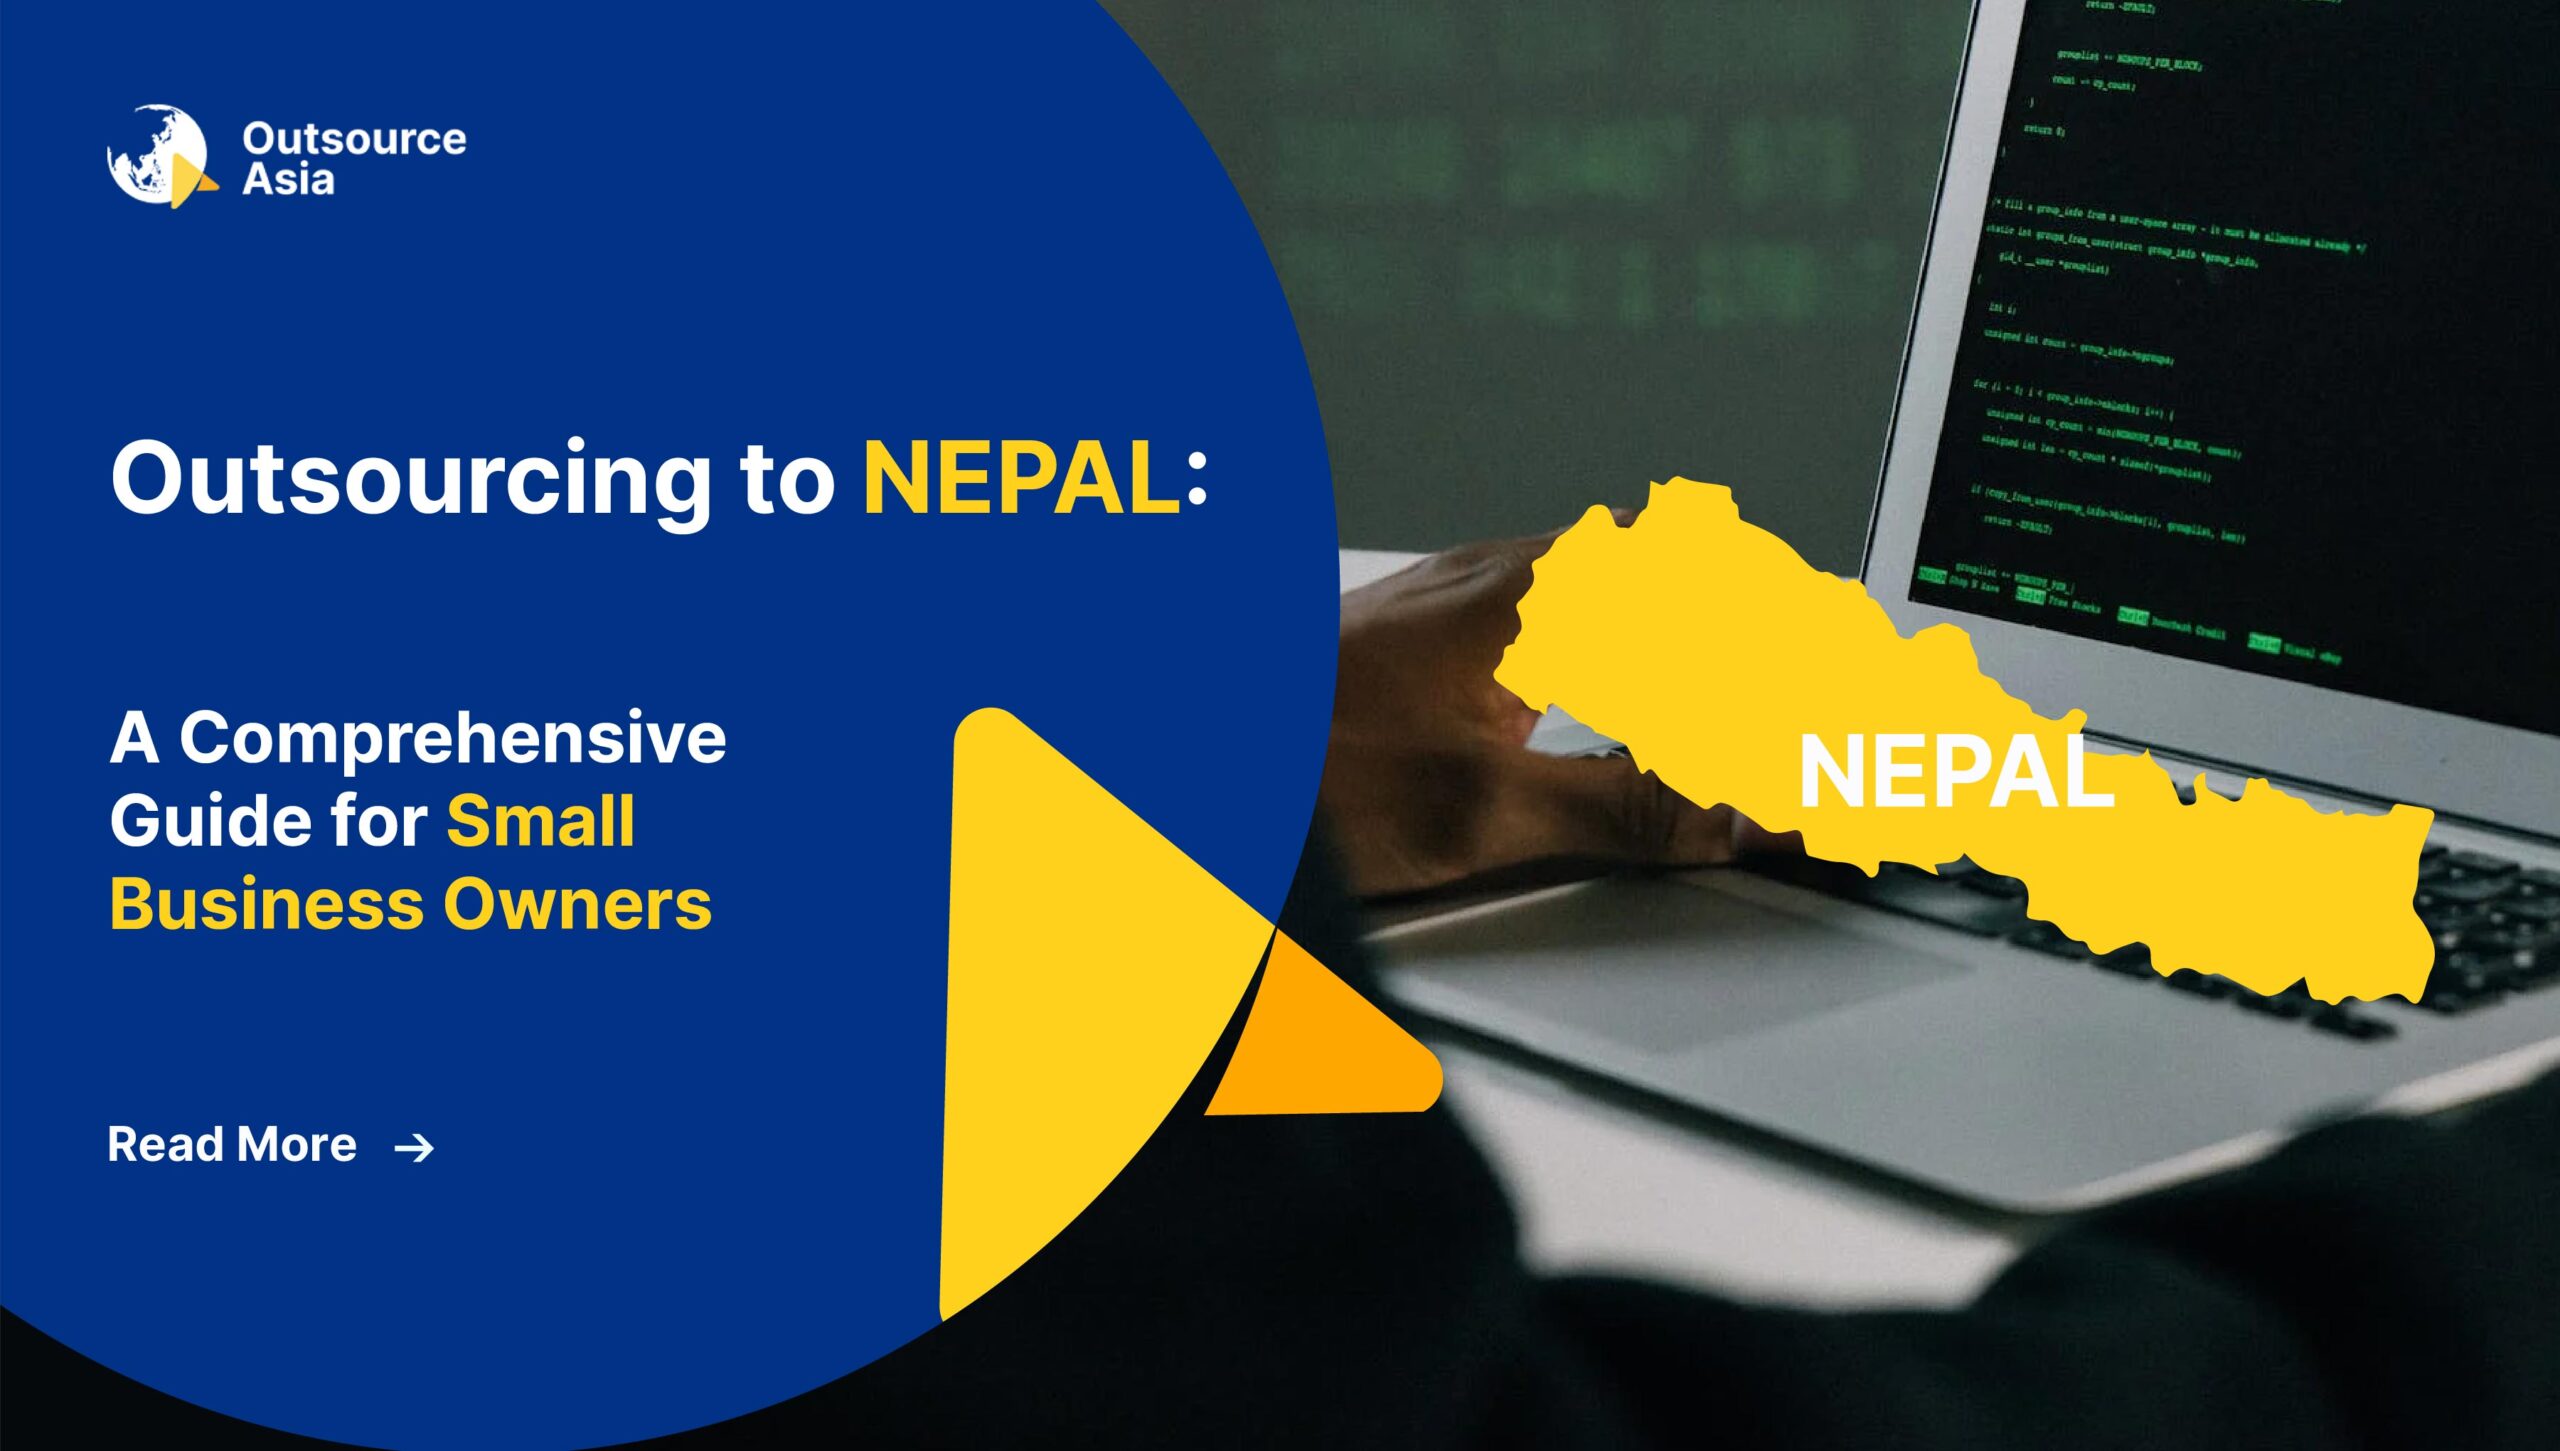 Outsourcing to NEPAL: A Comprehensive Guide for Small Business Owners 